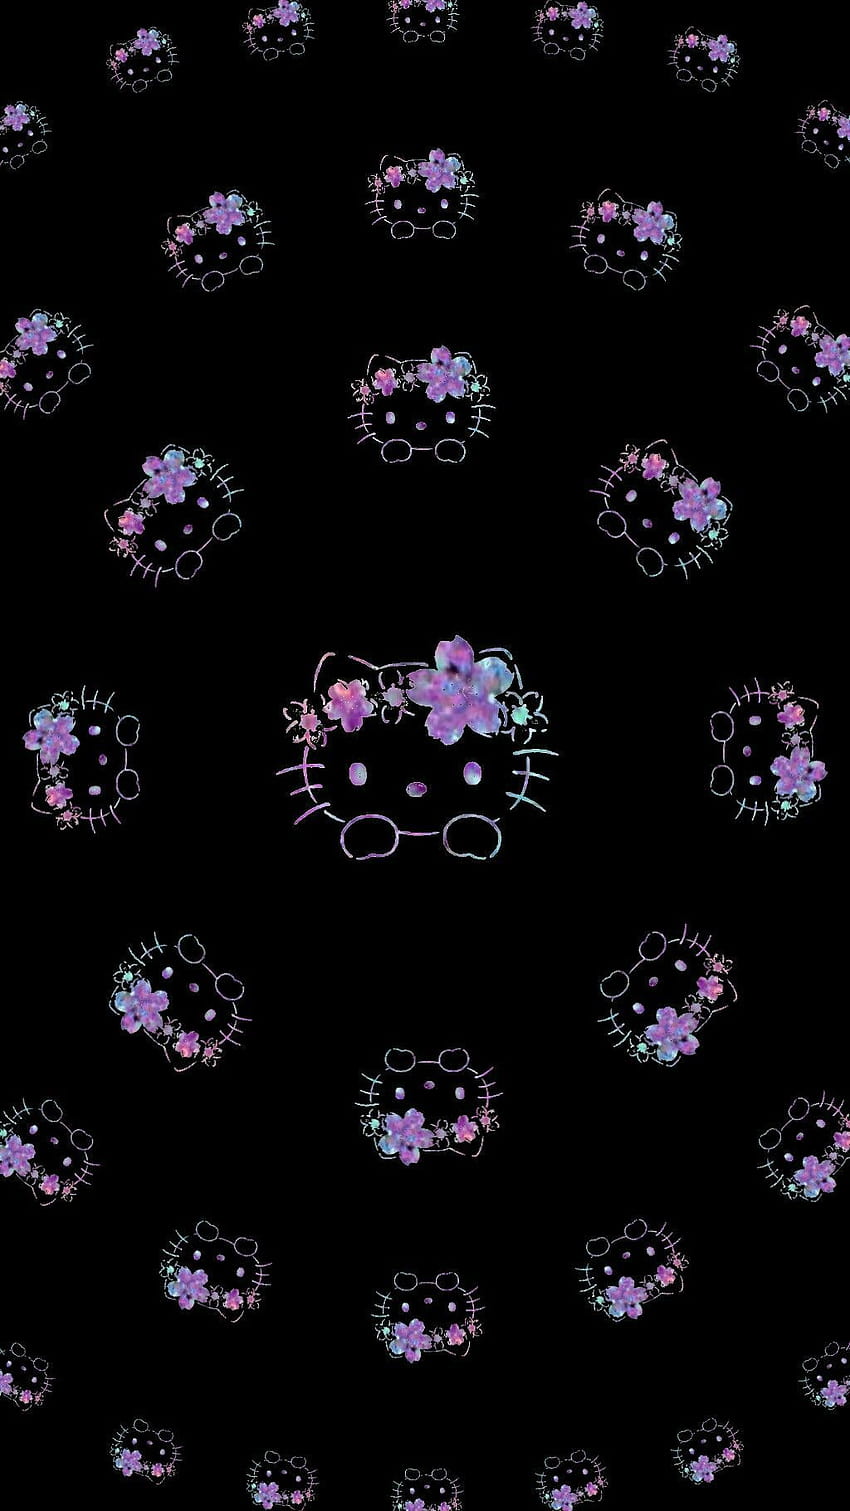 Transparent Background Aesthetic Png Hello Kitty Grunge  Hello Kitty  Clipart Free BirthdayKuromi Transparent  free transparent png images   pngaaacom